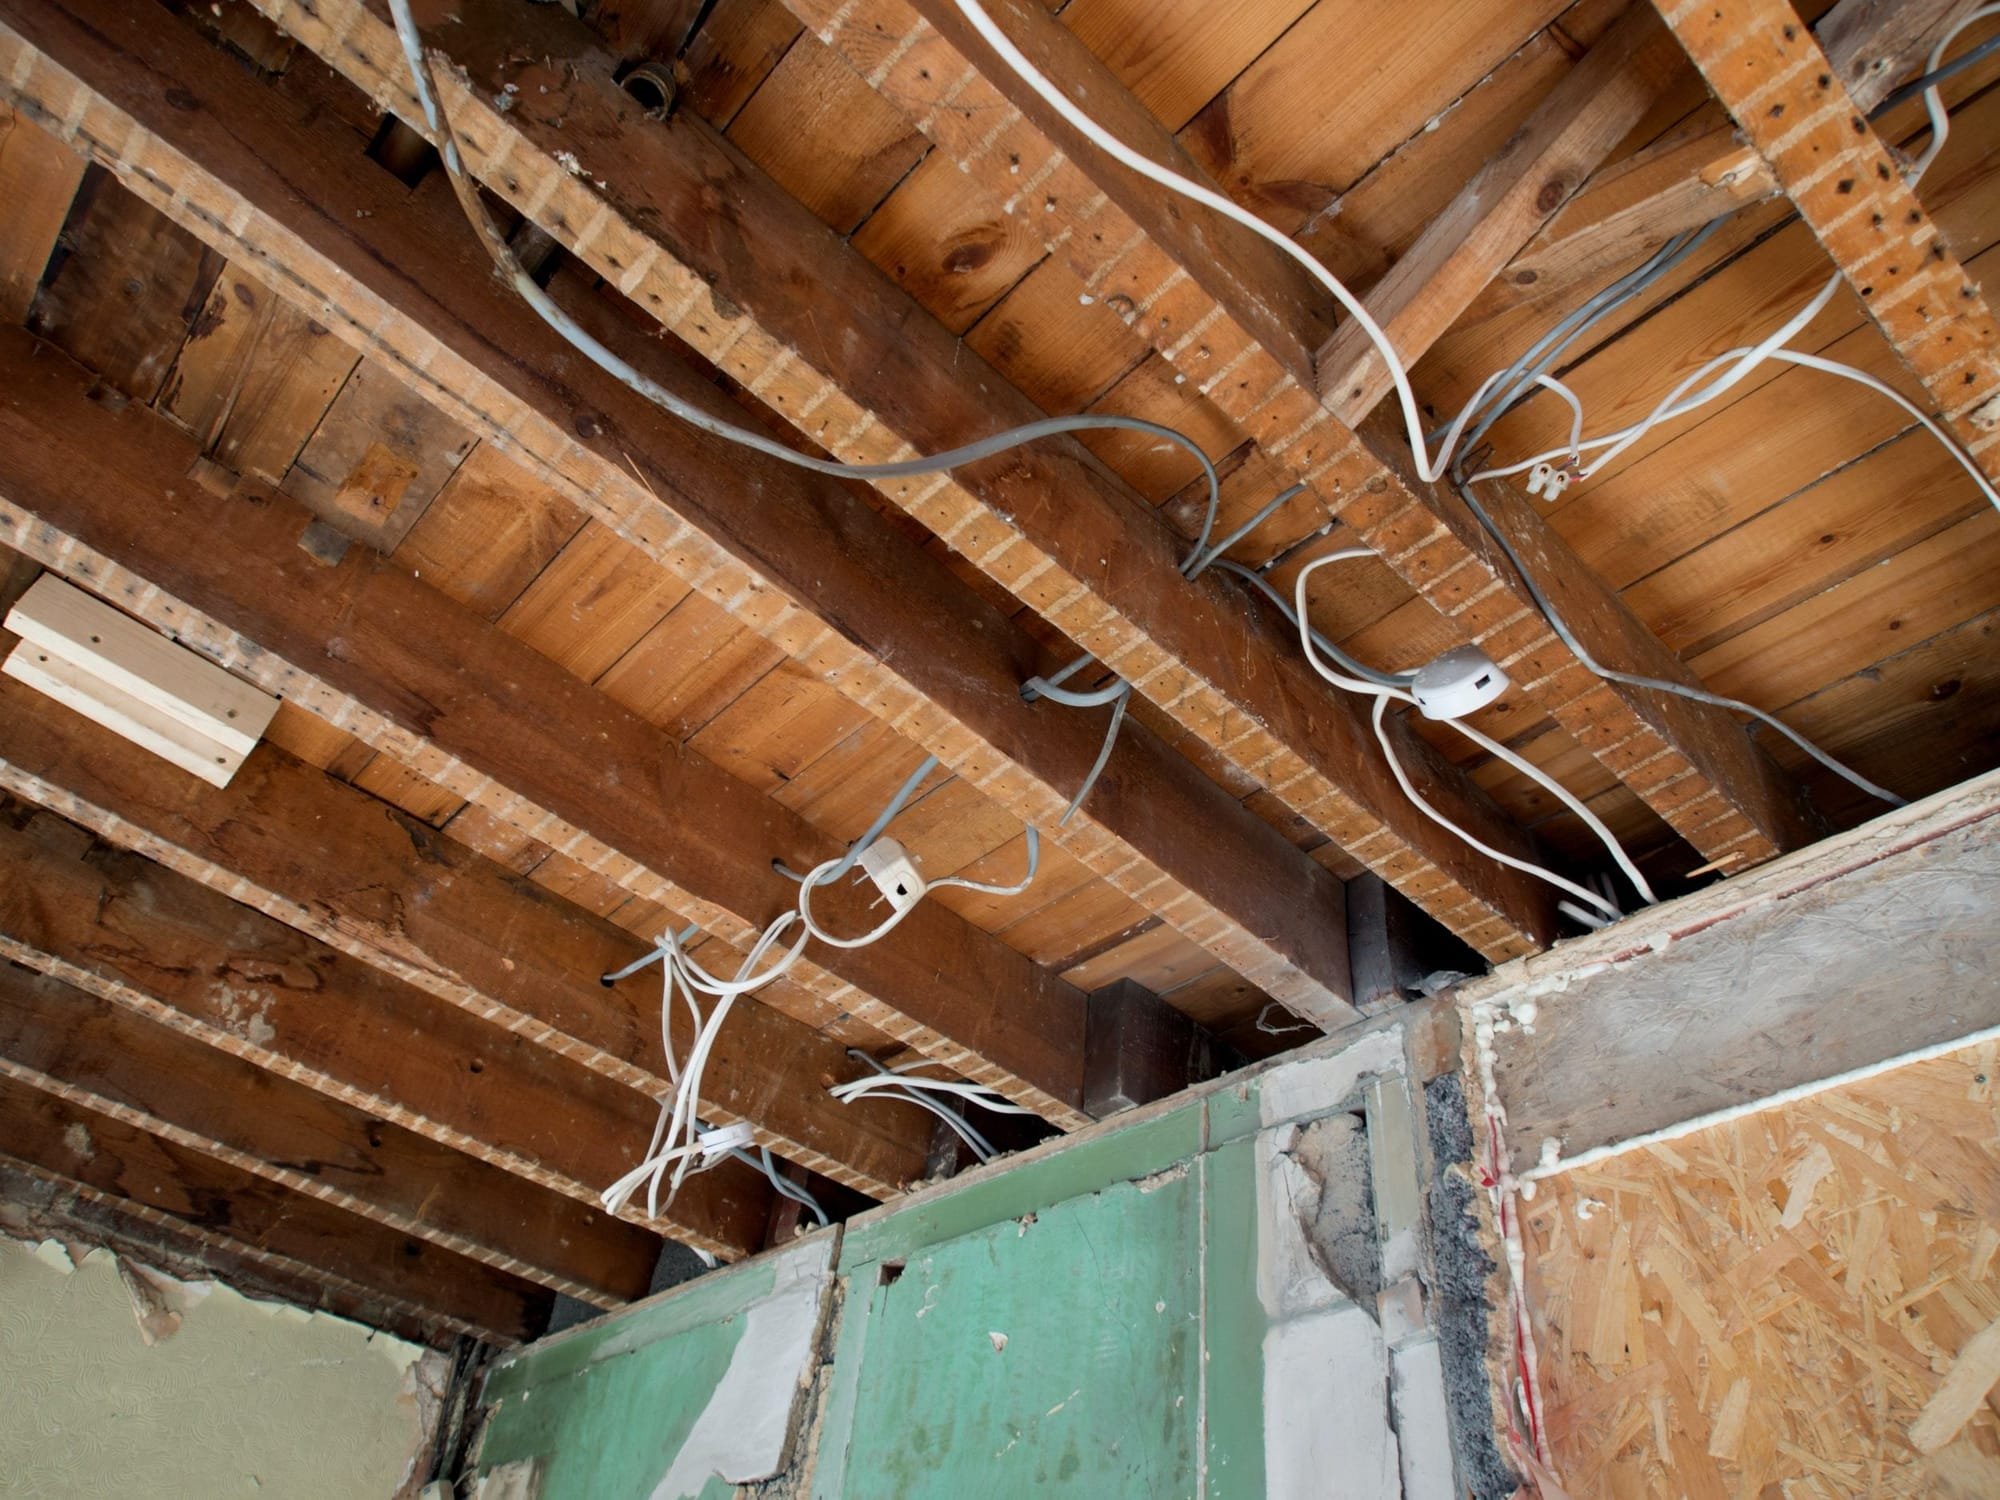 Electricity & Water damaged insulation in your home